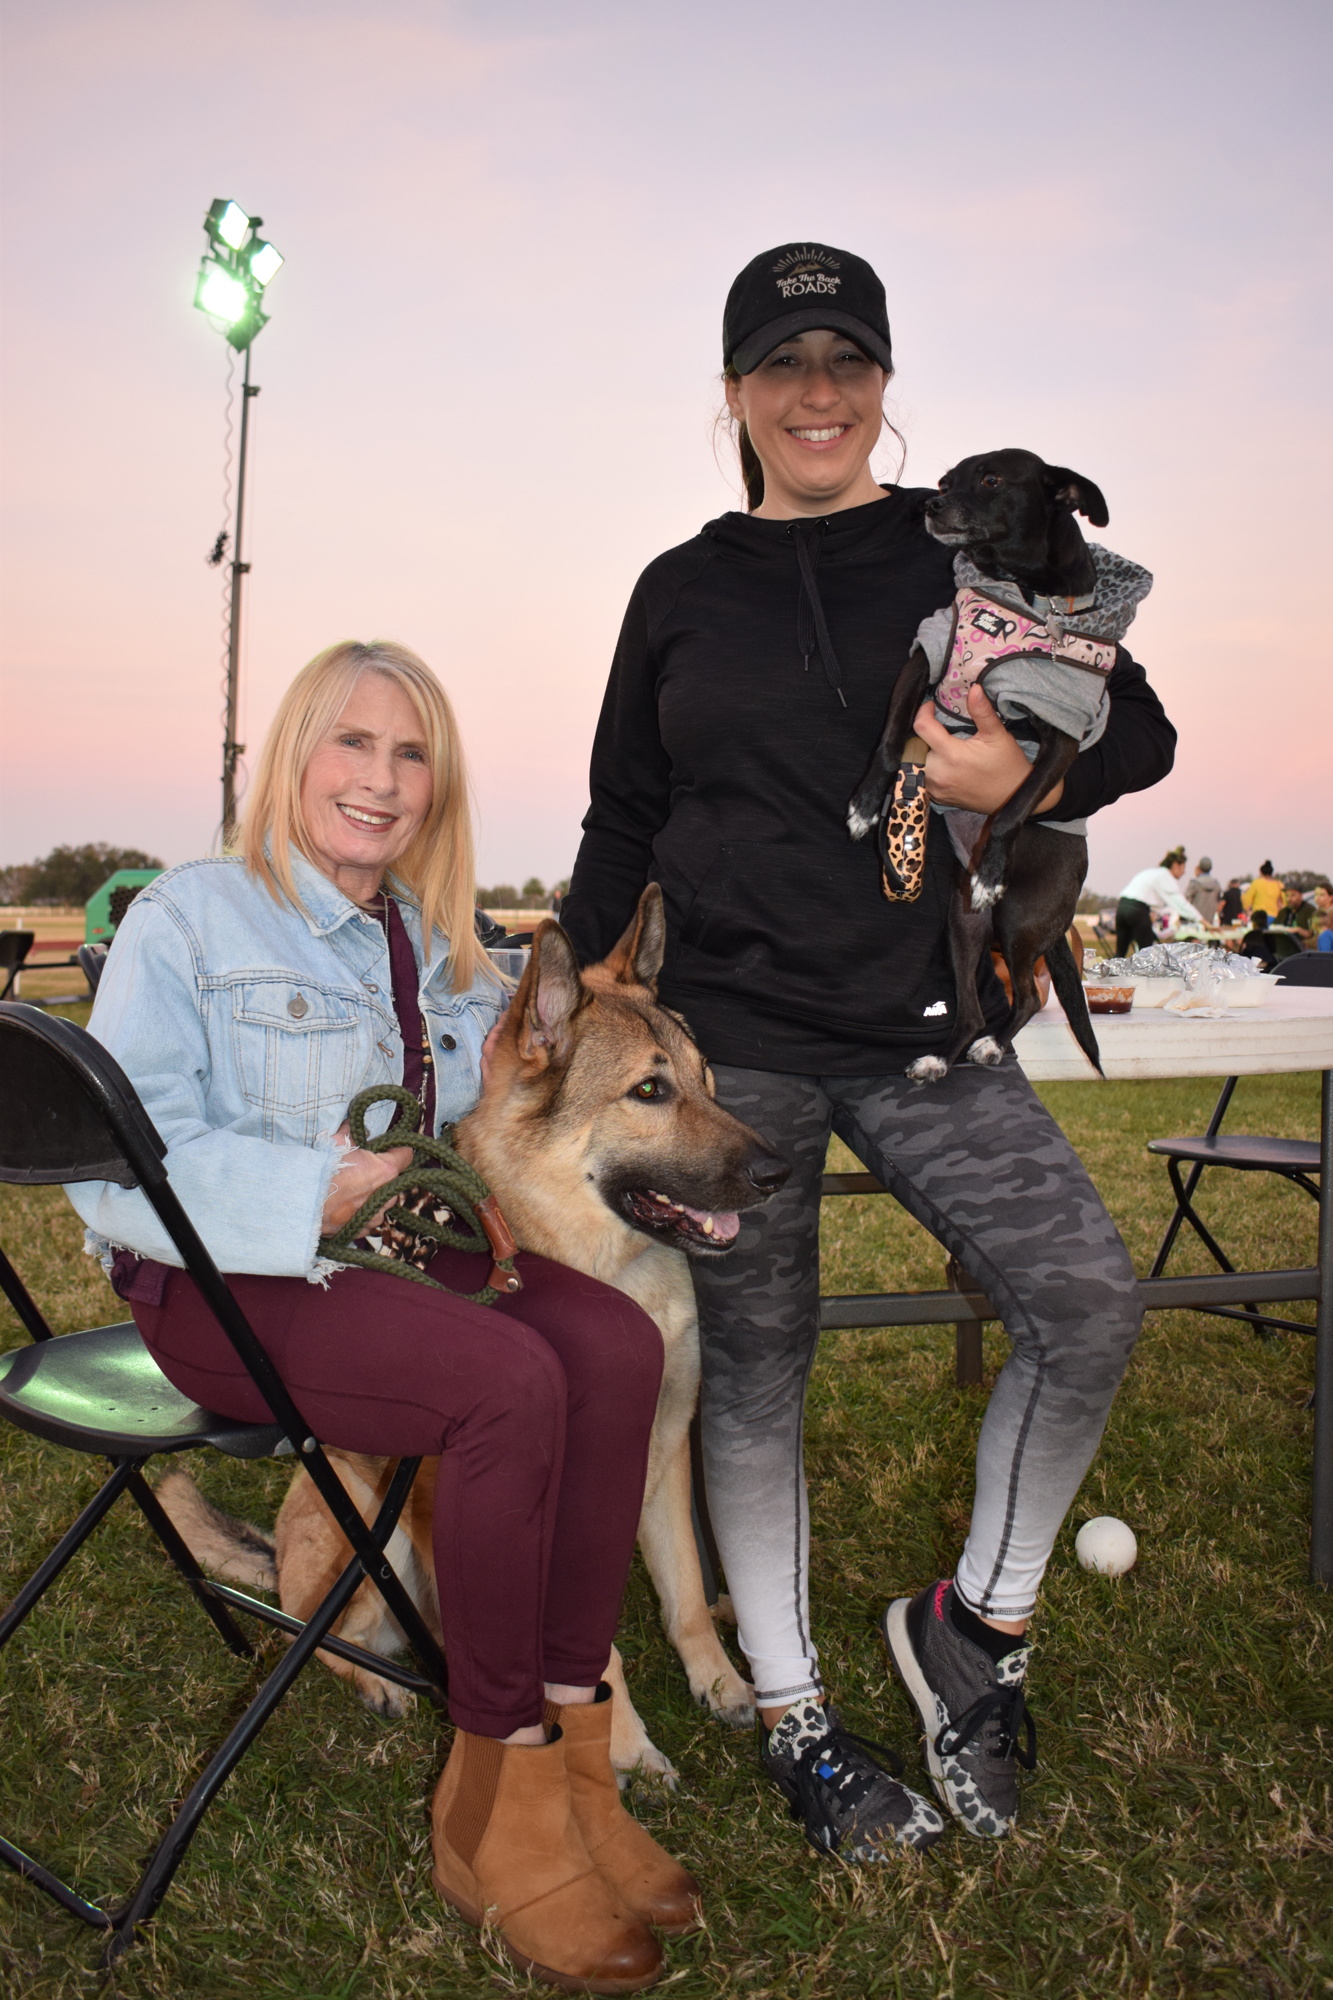 River Landing's Cindy Ernst and her daughter Falyn Ernst spend time with their dogs at Ranch Nite Wednesdays. Falyn Ernst would occasionally give her dogs a french fry.